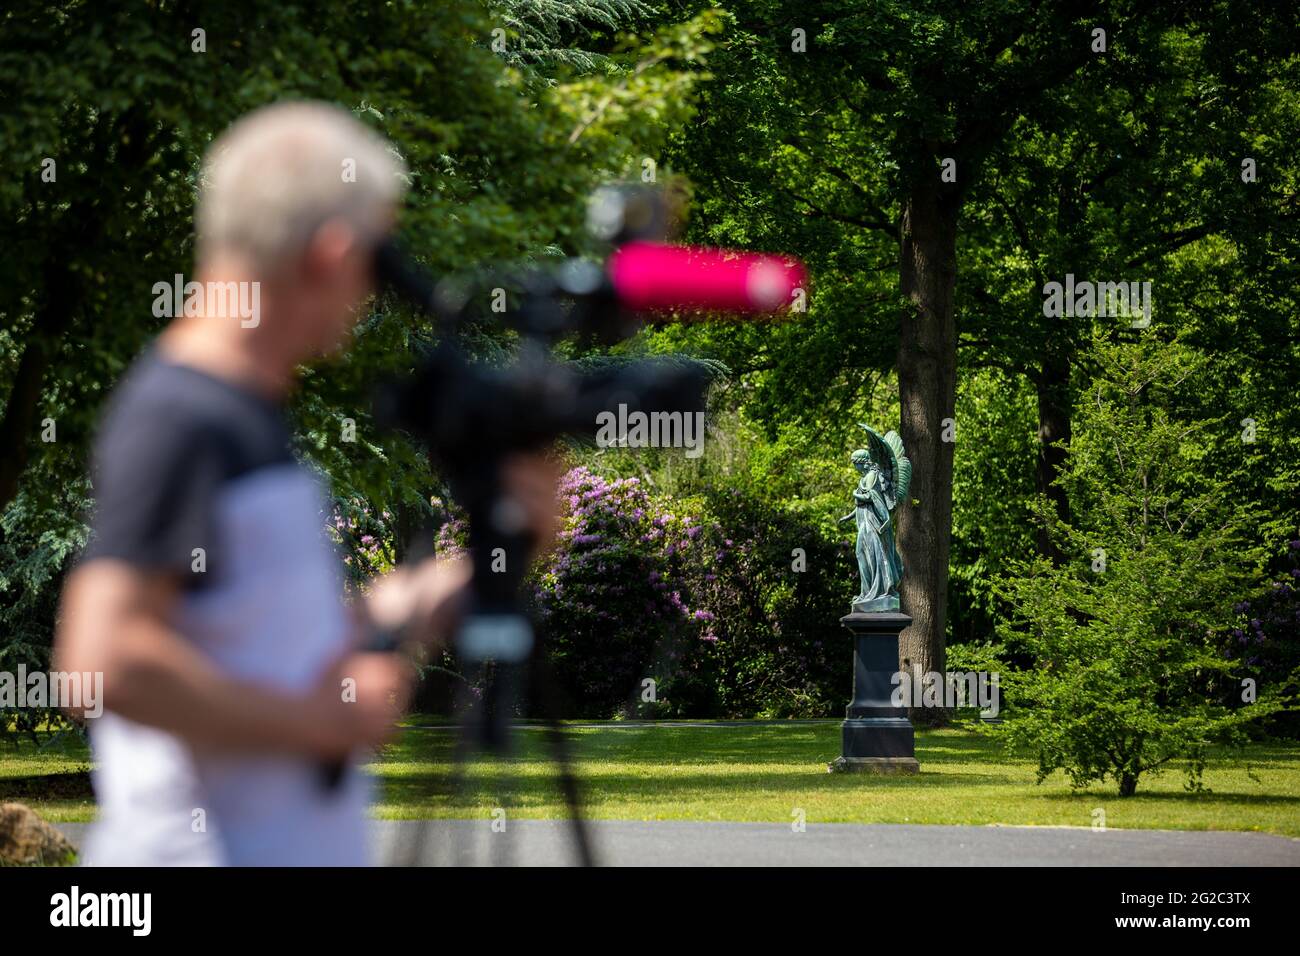 Hanover, Germany. 10th June, 2021. A cameraman films before the start of the funeral of a murder victim in front of the city cemetery Stöcken. On 03.06.2021 there was an altercation between the occupants of two cars on the open street in Hanover, in the course of which a man was killed. Credit: Moritz Frankenberg/dpa/Alamy Live News Stock Photo